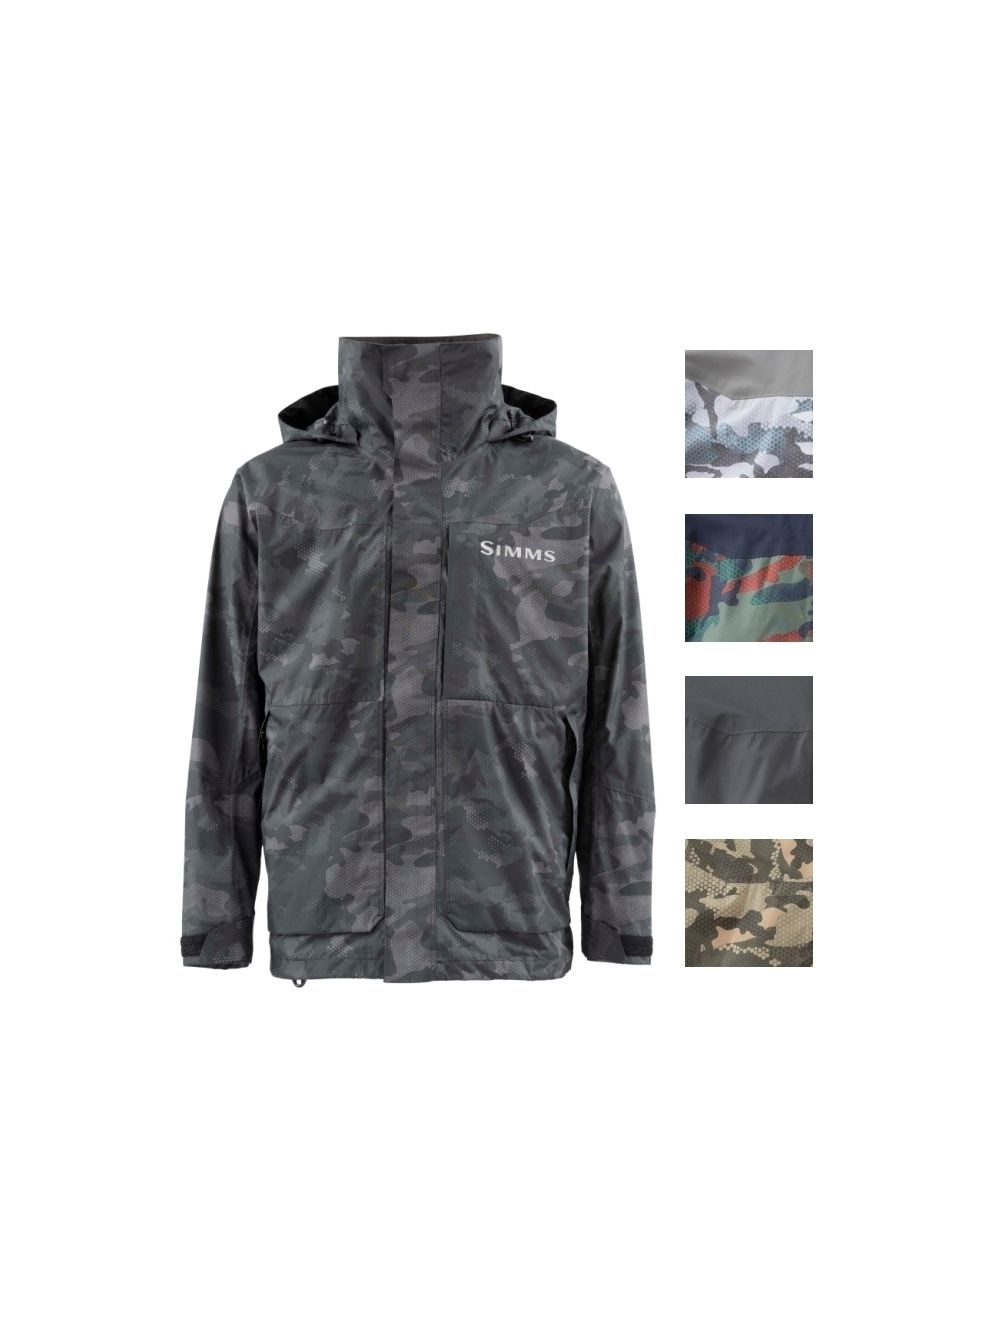 Simms M's Challenger Jacket TheFlyStop